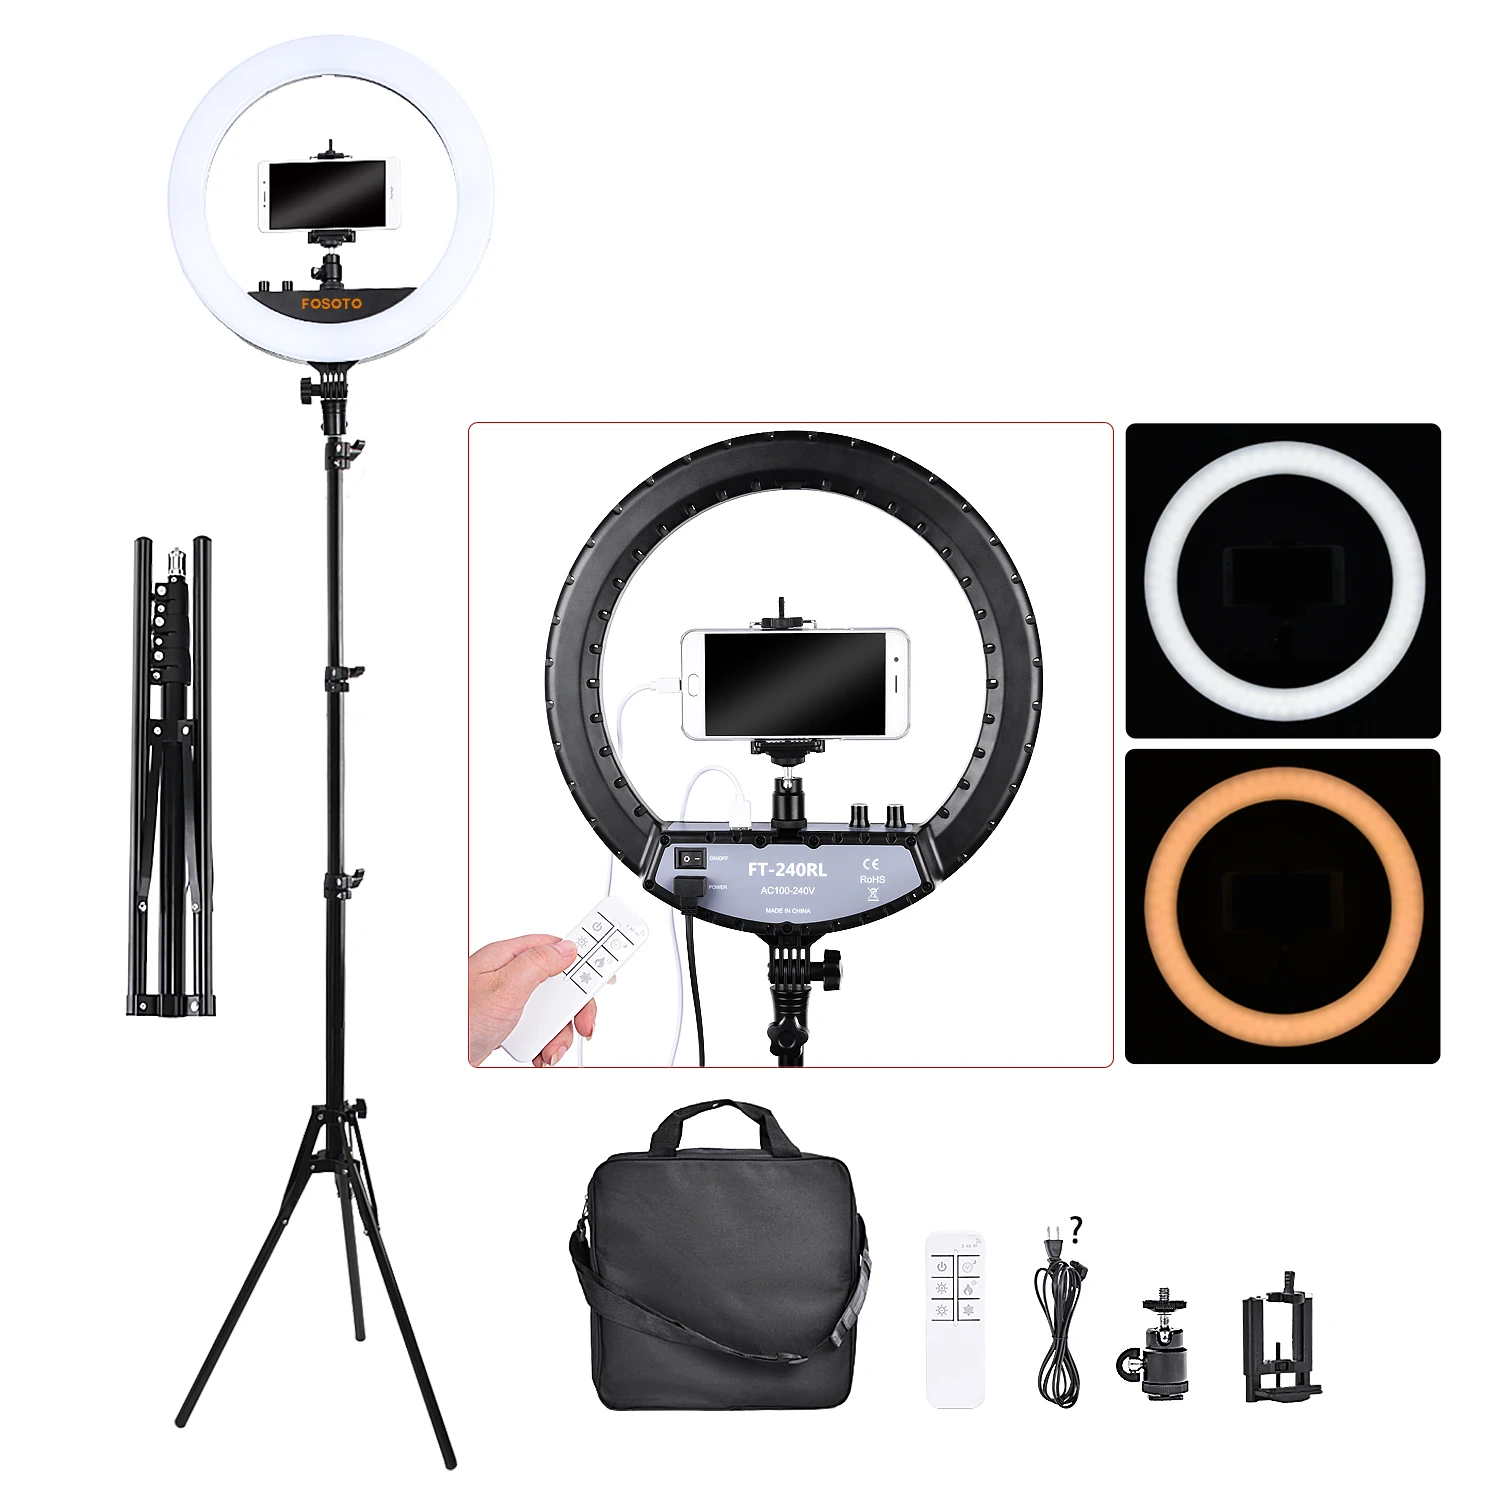 FOSOTO FT-240RL Led Ring Light 14 inch Ring Lamp Video Ringlight Photography lamp With Tripod Remote For Phone Makeup Youtube